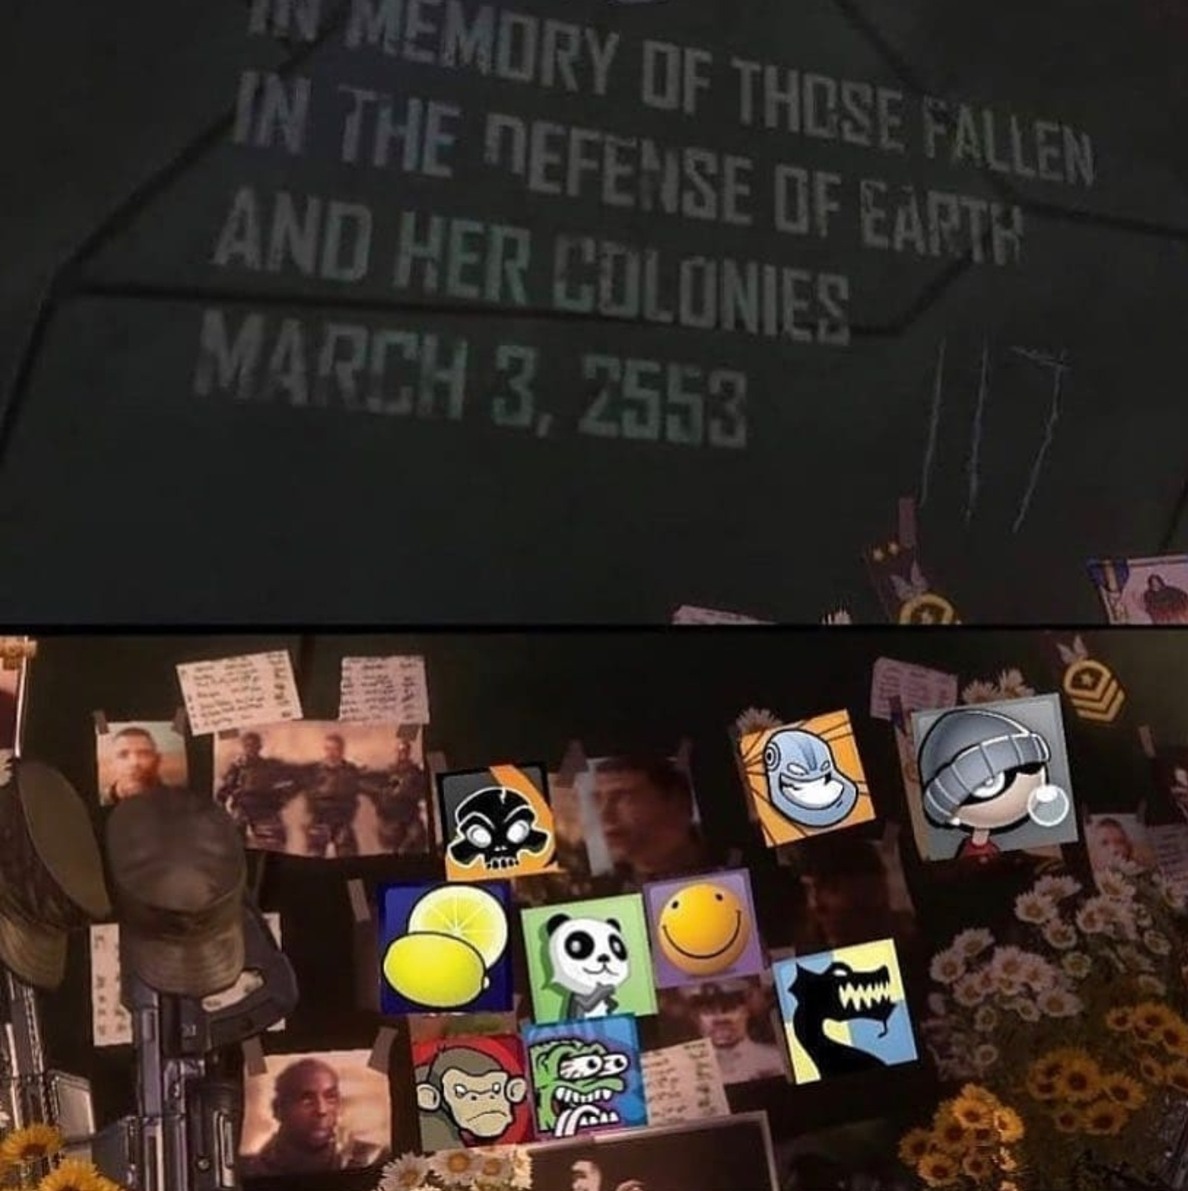 Press F to pay respects. - meme